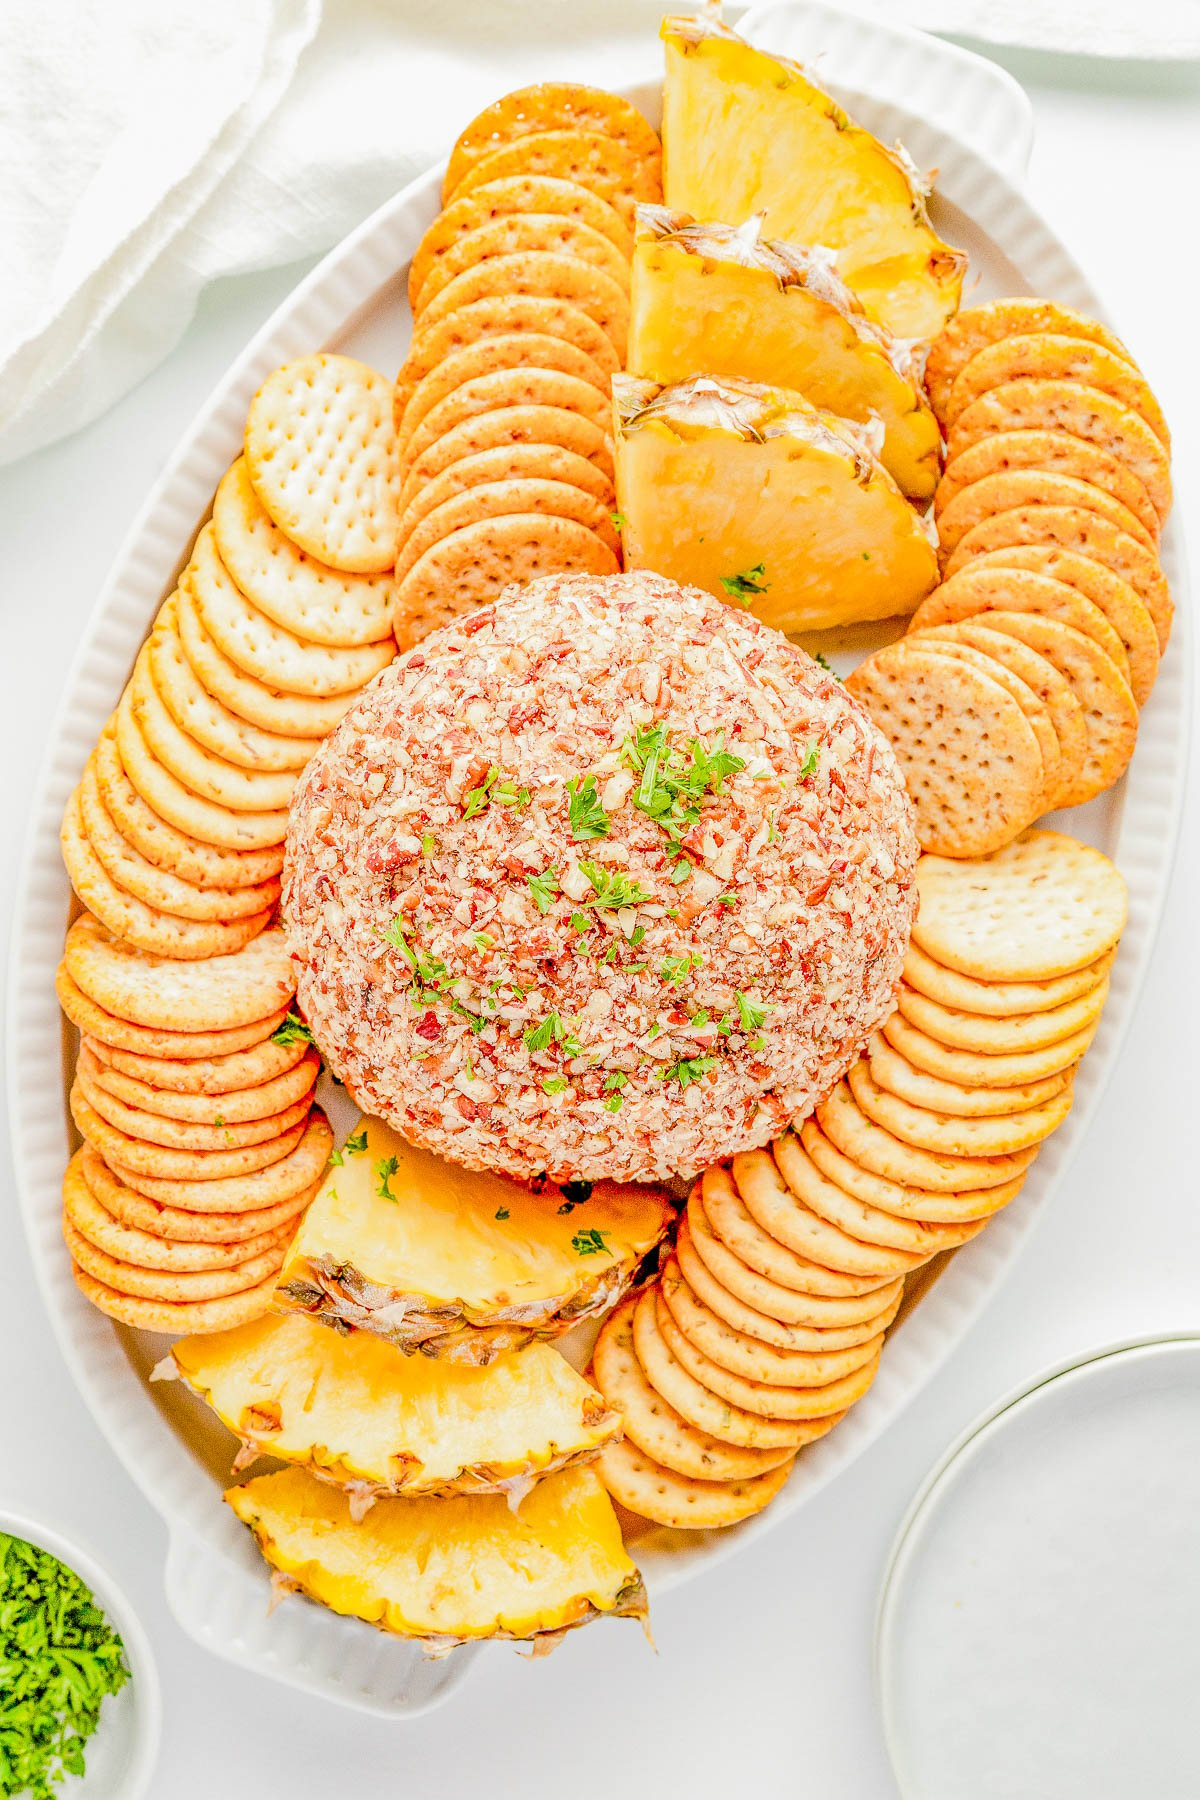 Pineapple Cheese Ball - An EASY holiday appetizer recipe that's a party favorite! Made with tangy cream cheese, juicy pineapple, green bell peppers, green onions, and plenty of nuts for lovely crunch and texture! It's a super simple dump-and-stir recipe with no baking, no cooking, no mixer, and no fuss! Serve this at Christmas parties, New Year's Eve, Super Bowl, and any time you need a guaranteed winner! 